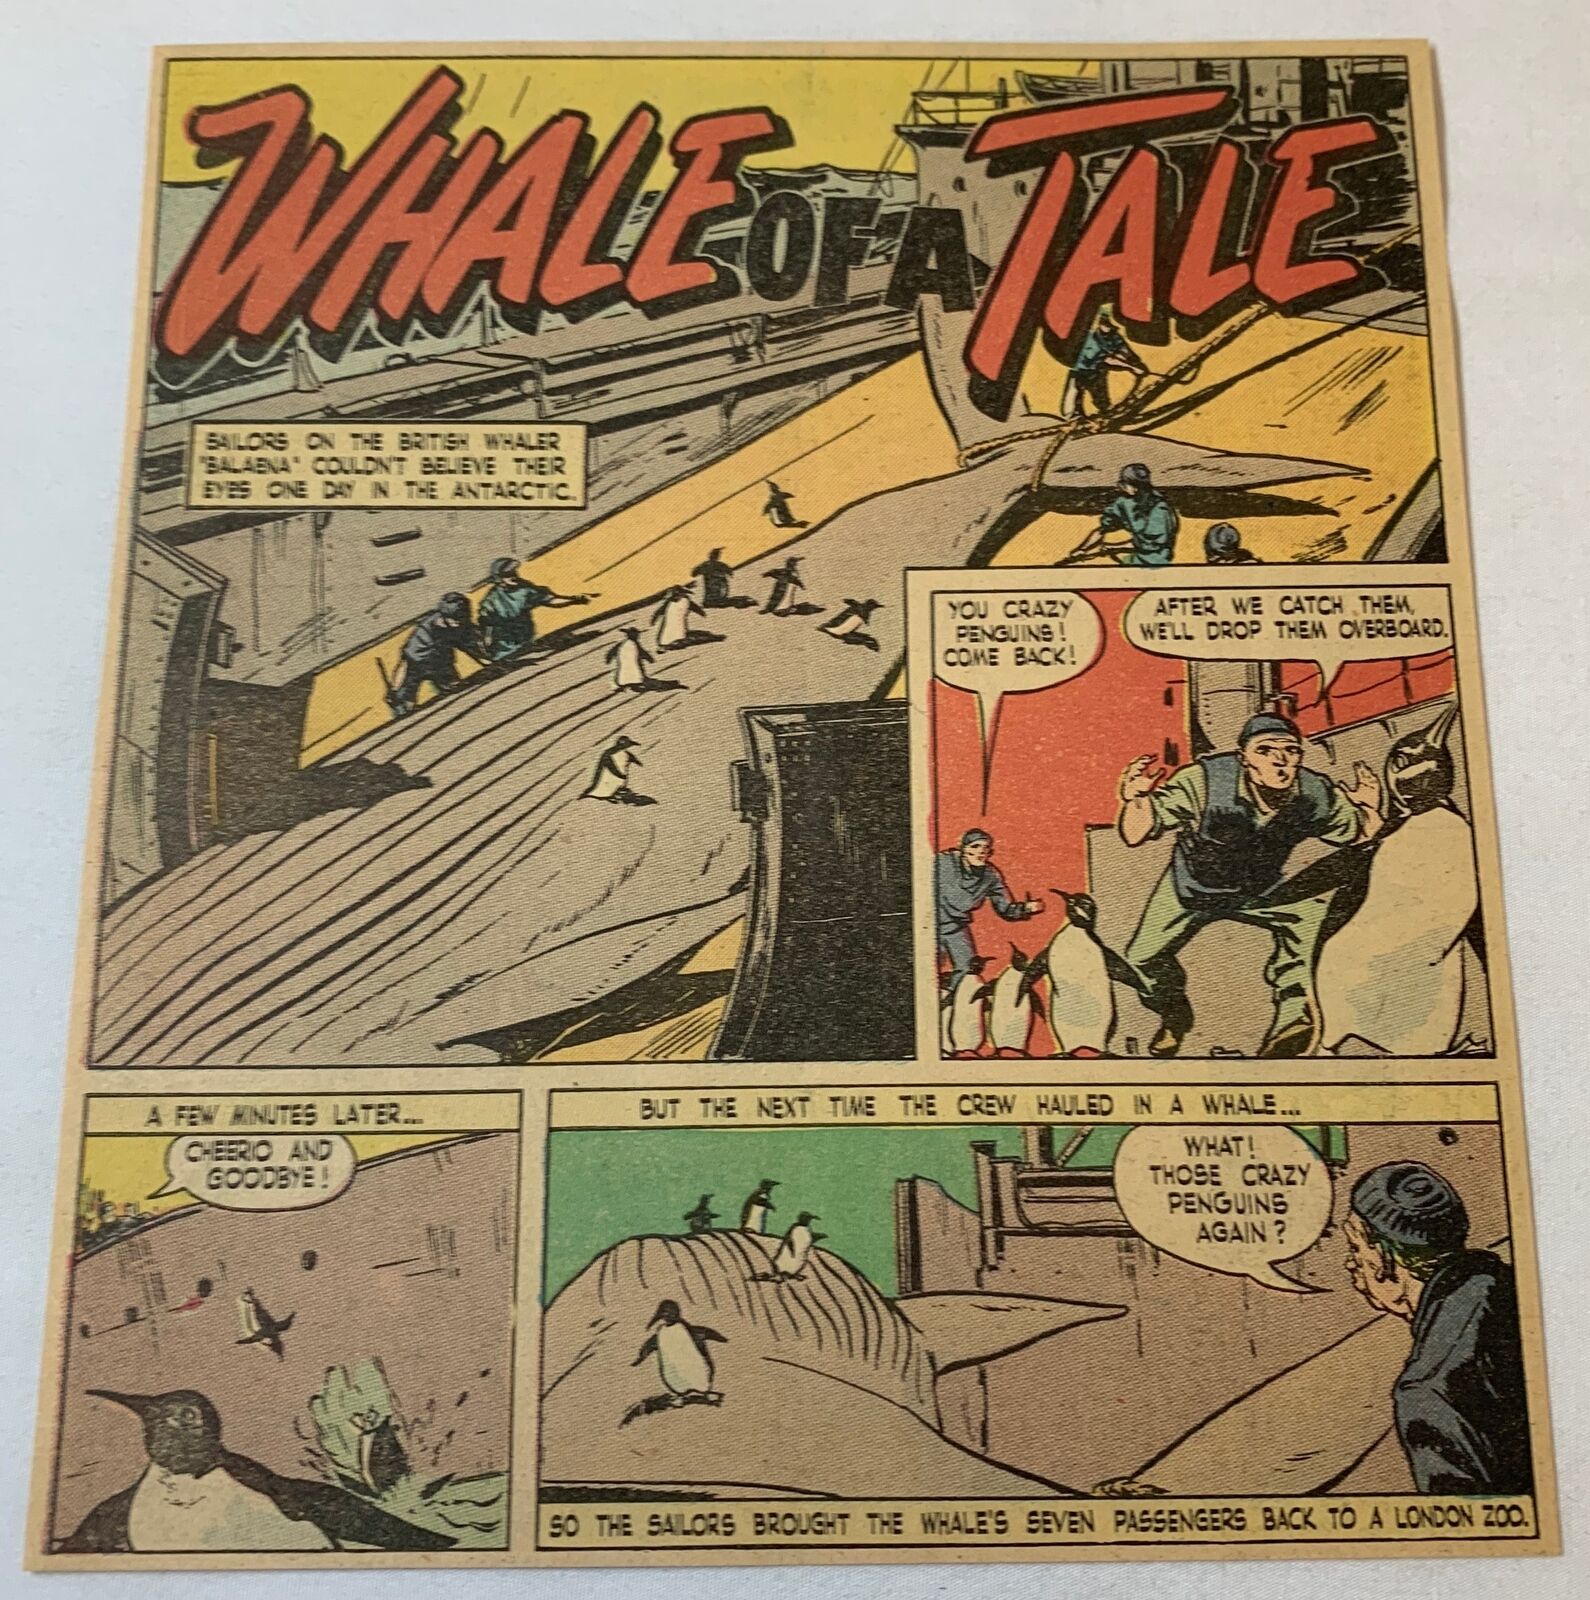 1947 cartoon ~ PENGUINS ON A WHALING VESSEL ~ Whale Of A Tale